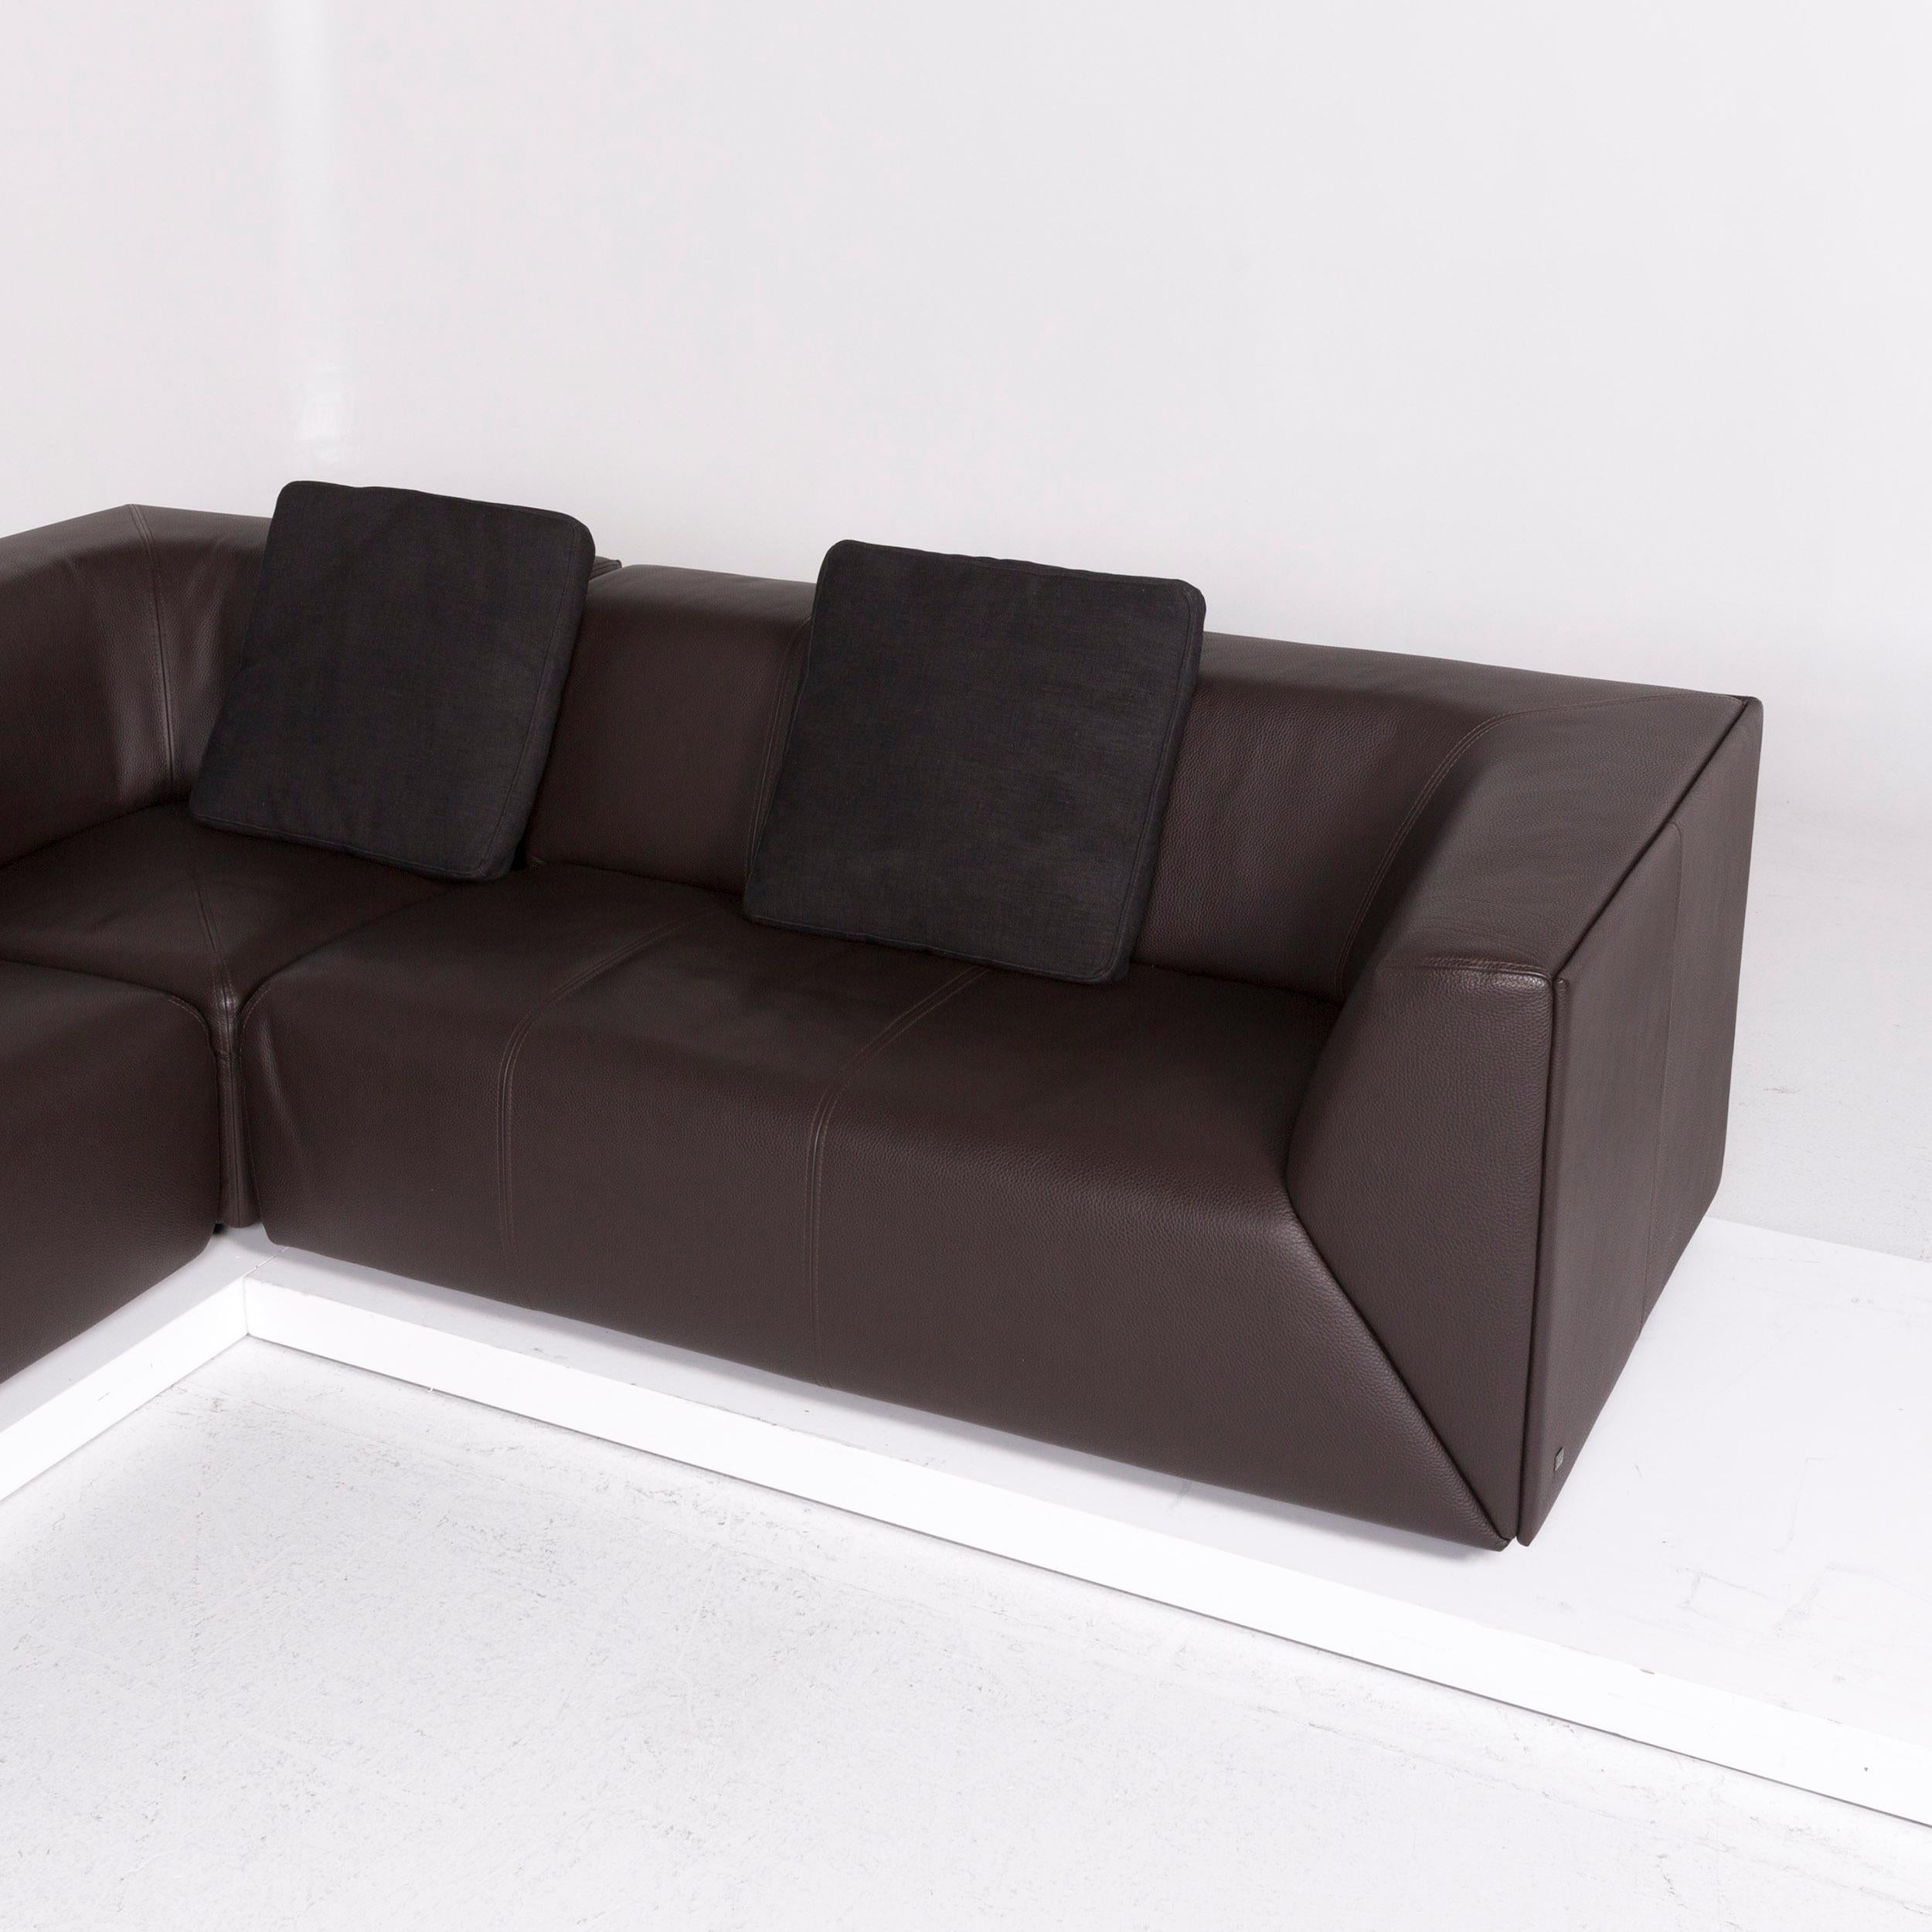 Contemporary Rolf Benz Leather Corner Sofa Brown Dark Brown Sofa Couch For Sale